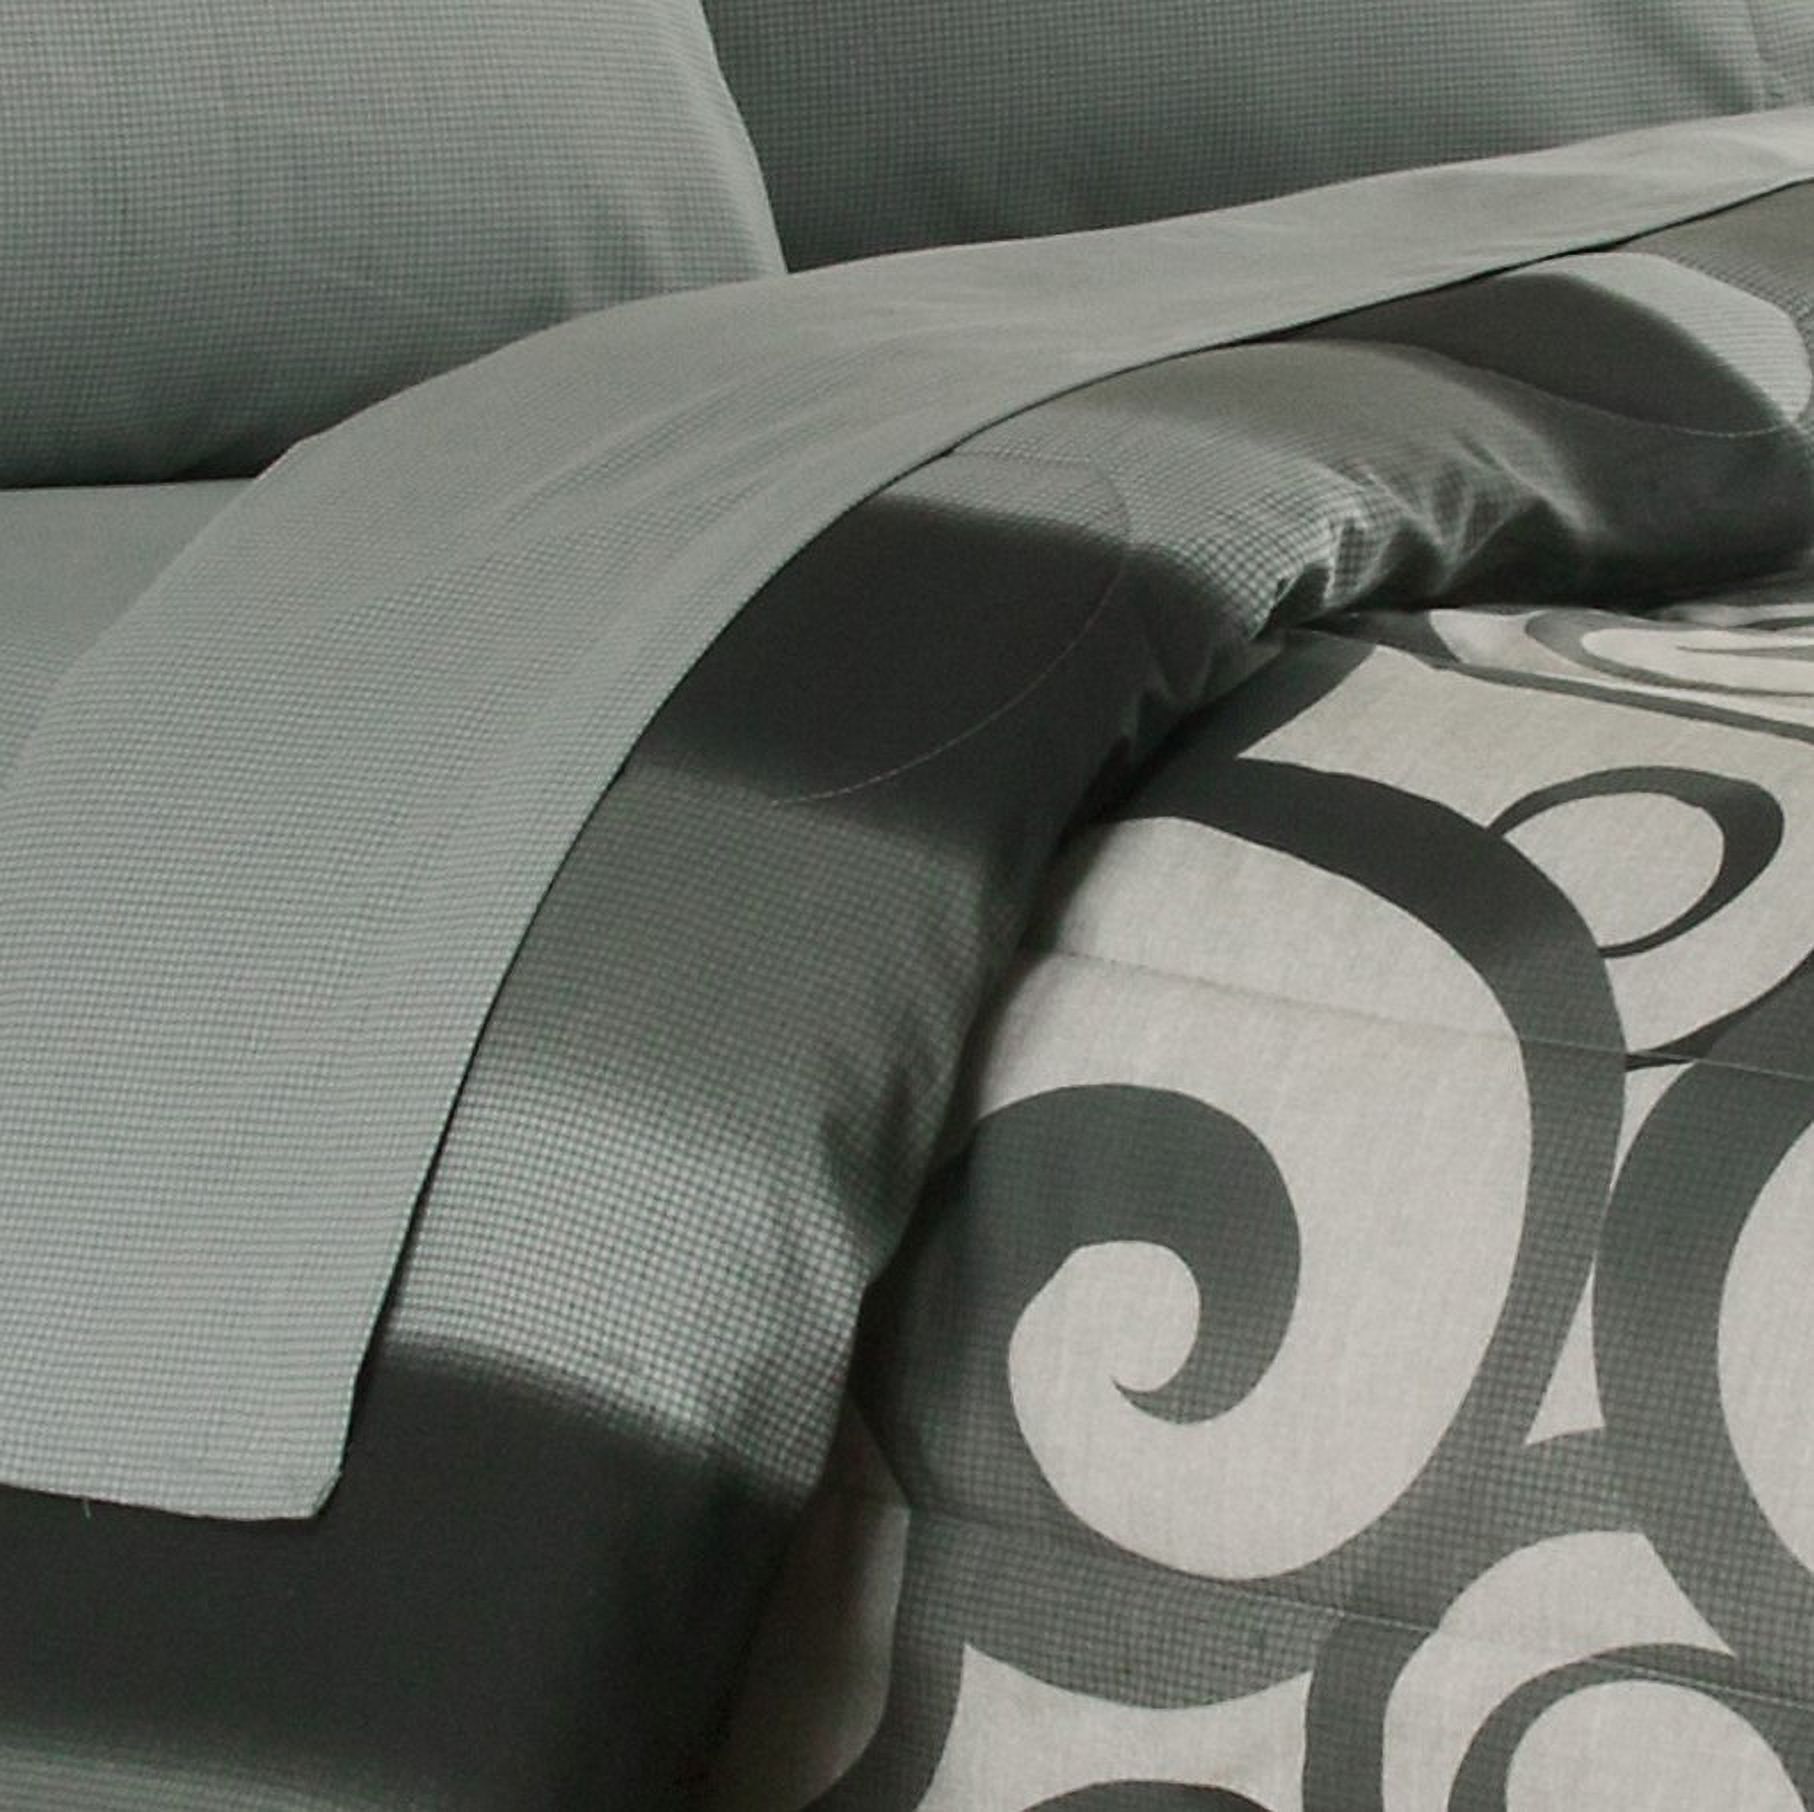 Sloane Street Alessandro Scroll, Reversible, Complete Set With Bonus Bed Skirt By Royale Linens - image 3 of 3